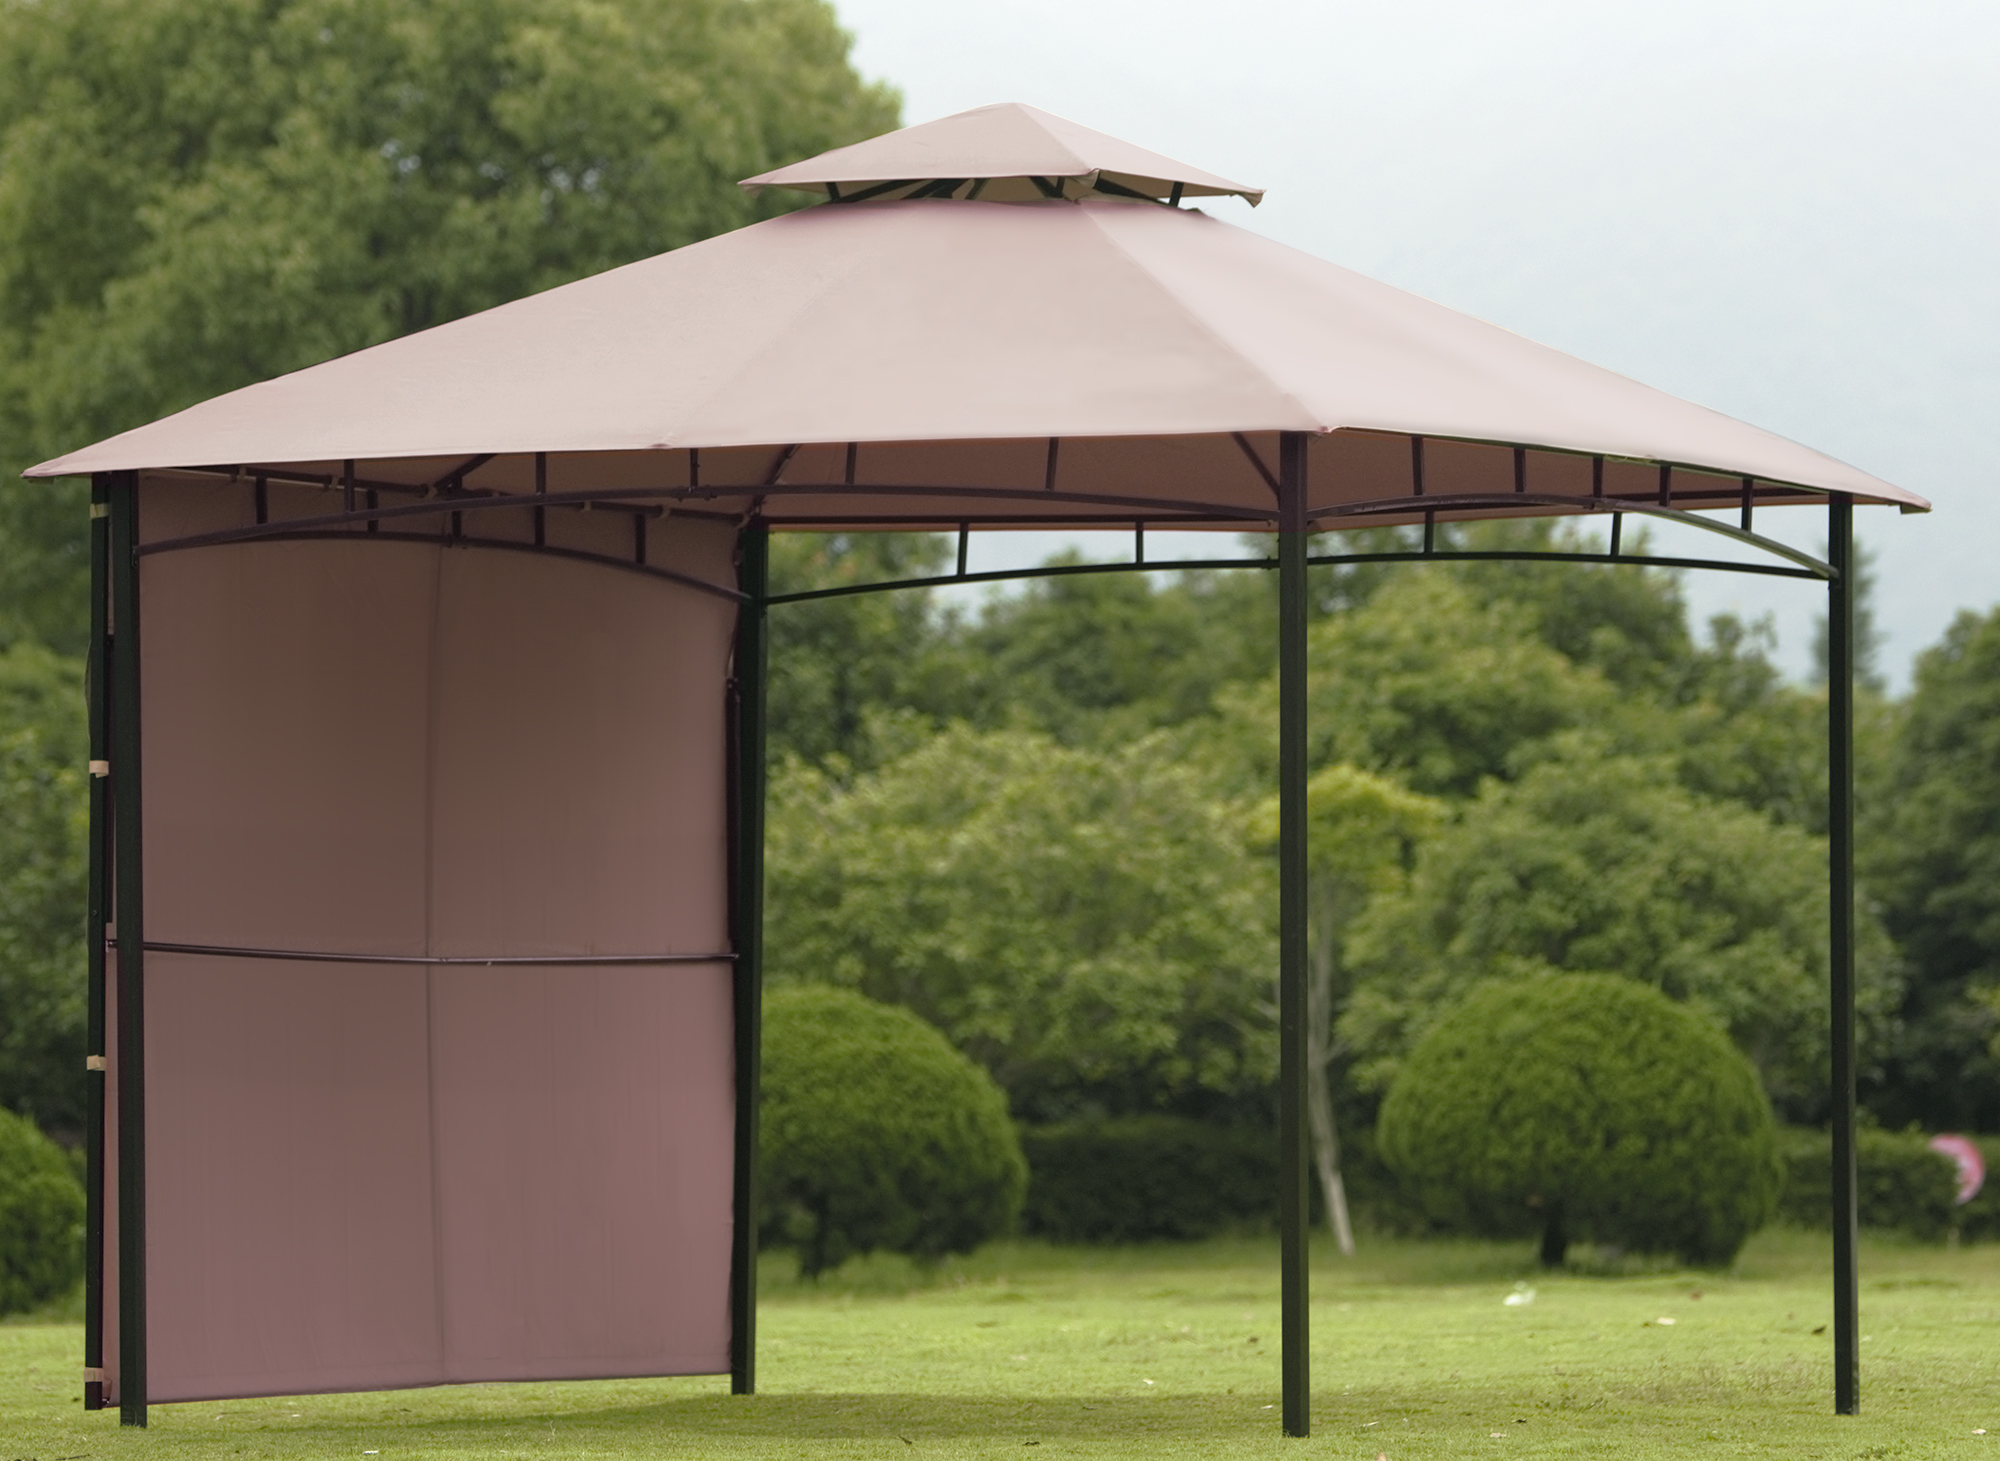 U-style Foot Easy Assembly Seasonal Shade UV Protection with Extendable Awning Outdoor Gazebo-CASAINC